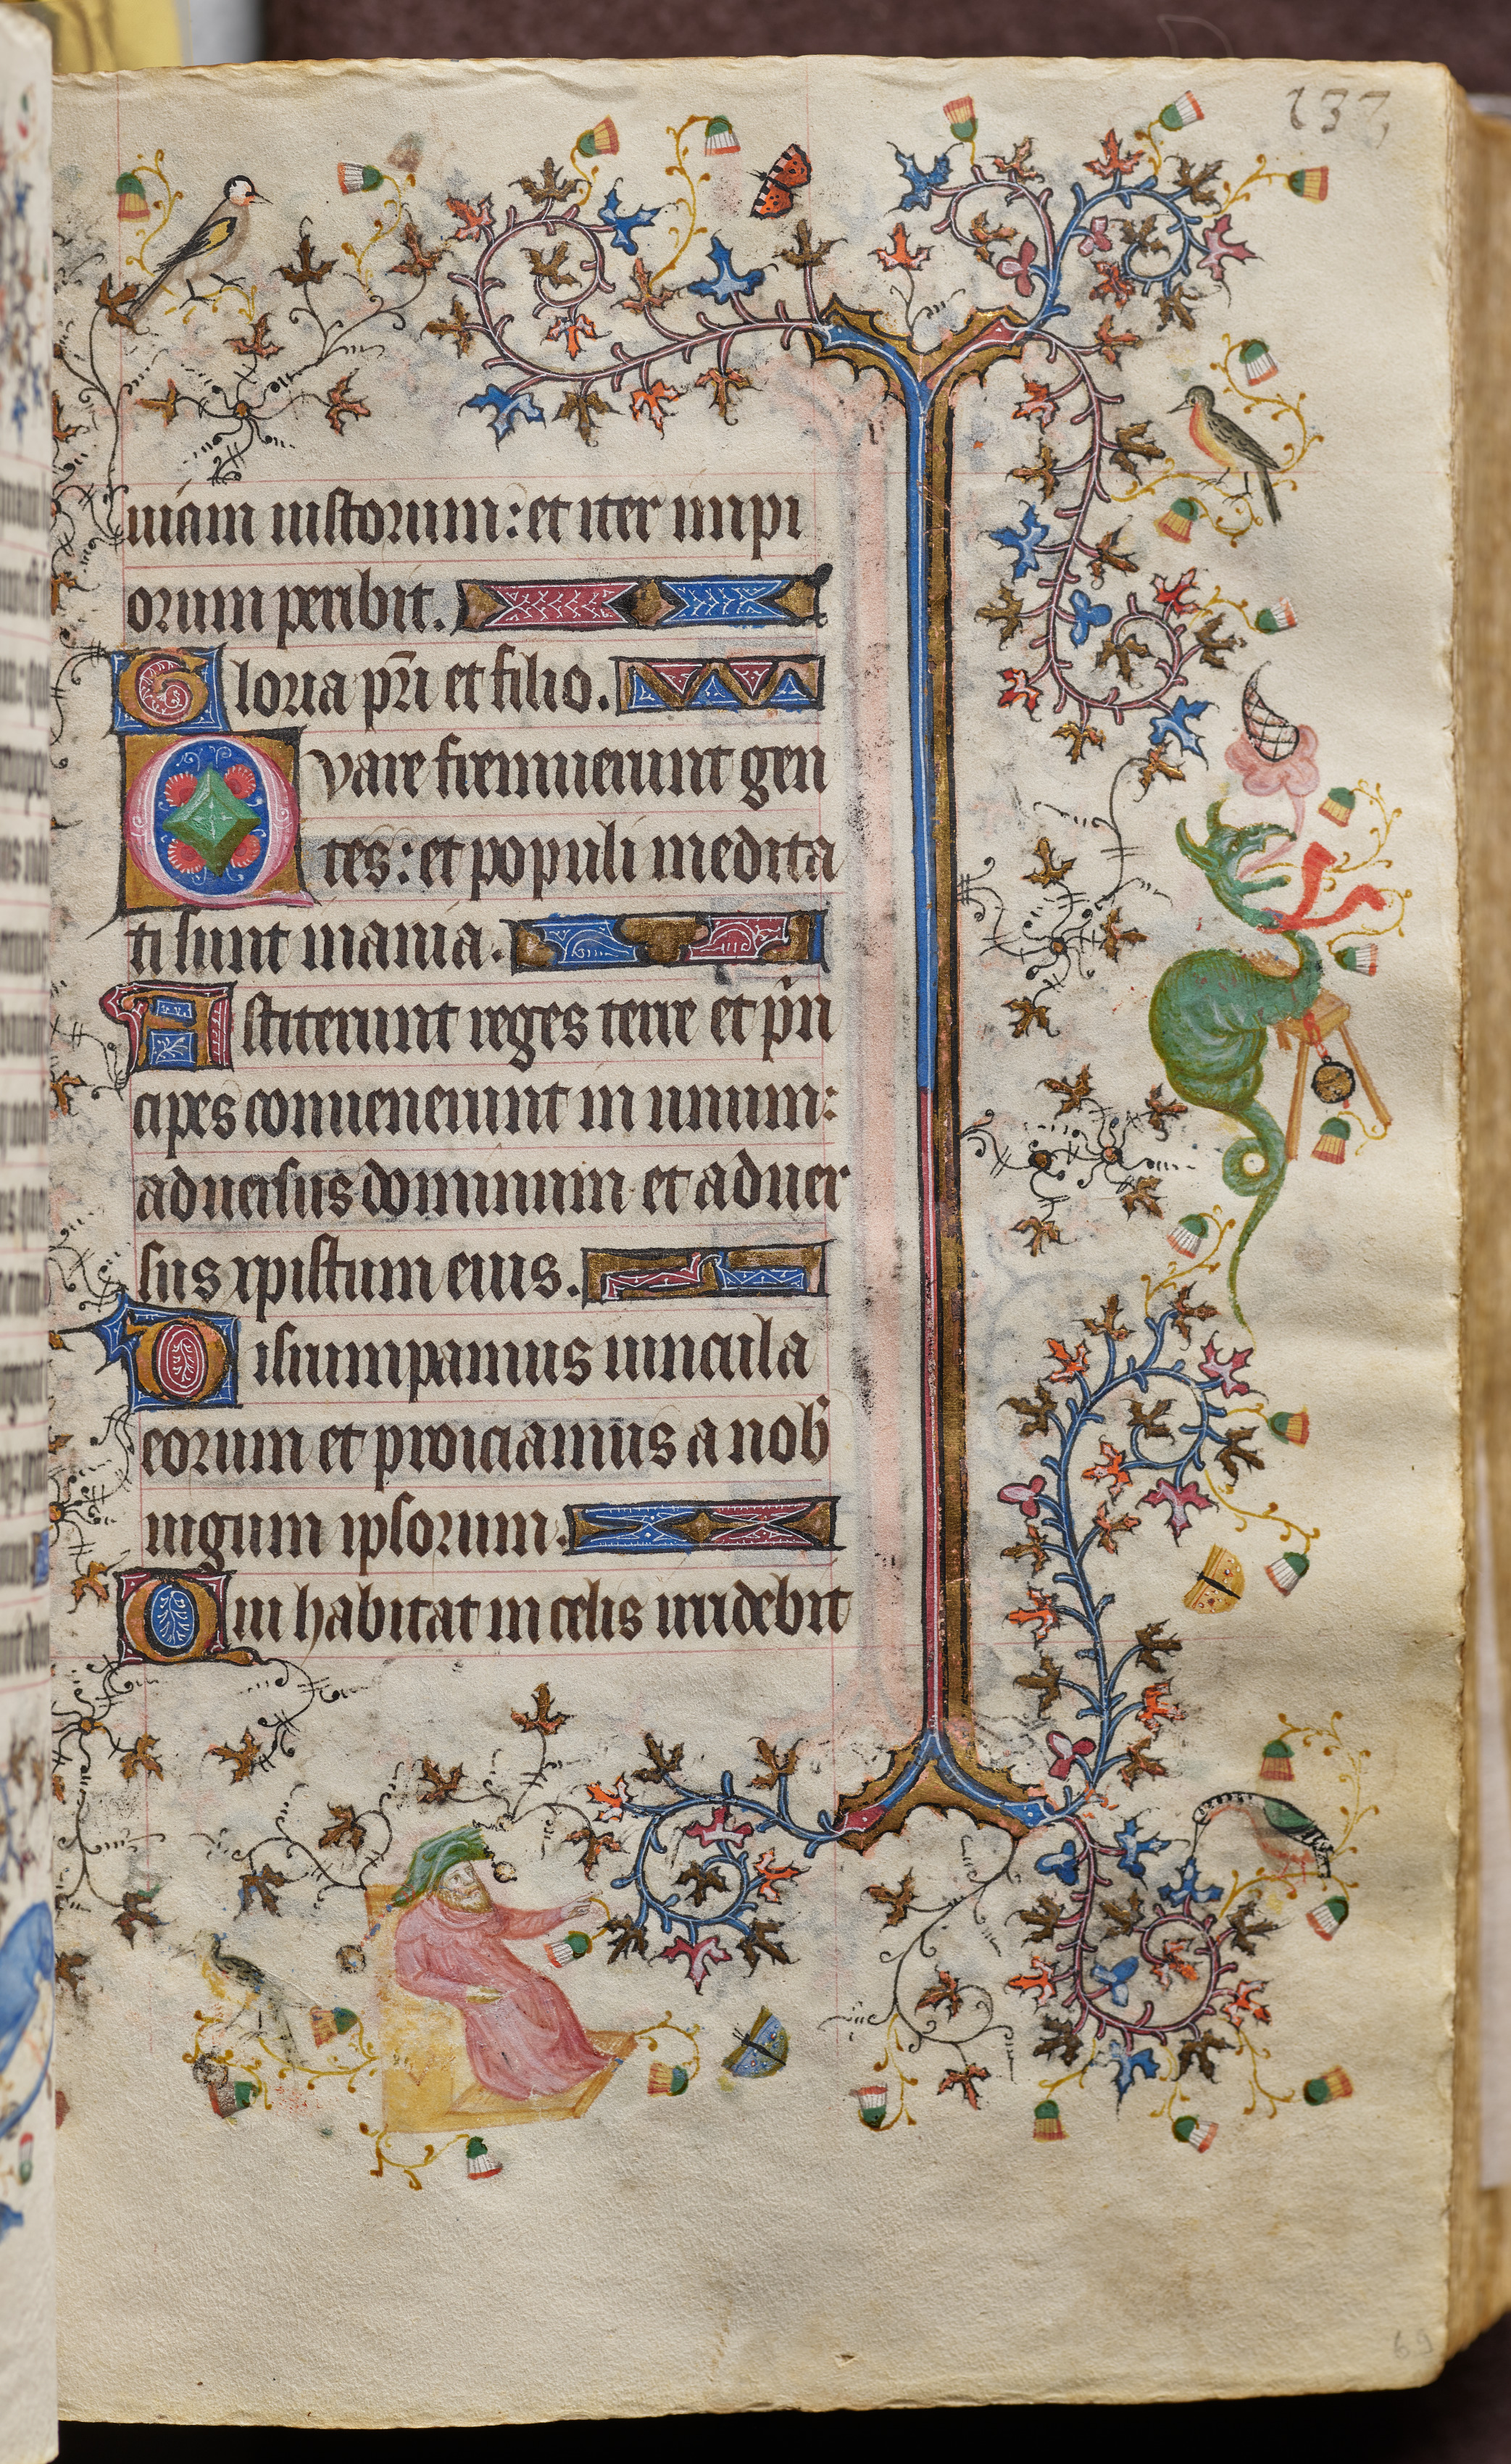 Hours of Charles the Noble, King of Navarre (1361-1425): fol. 69r, Text